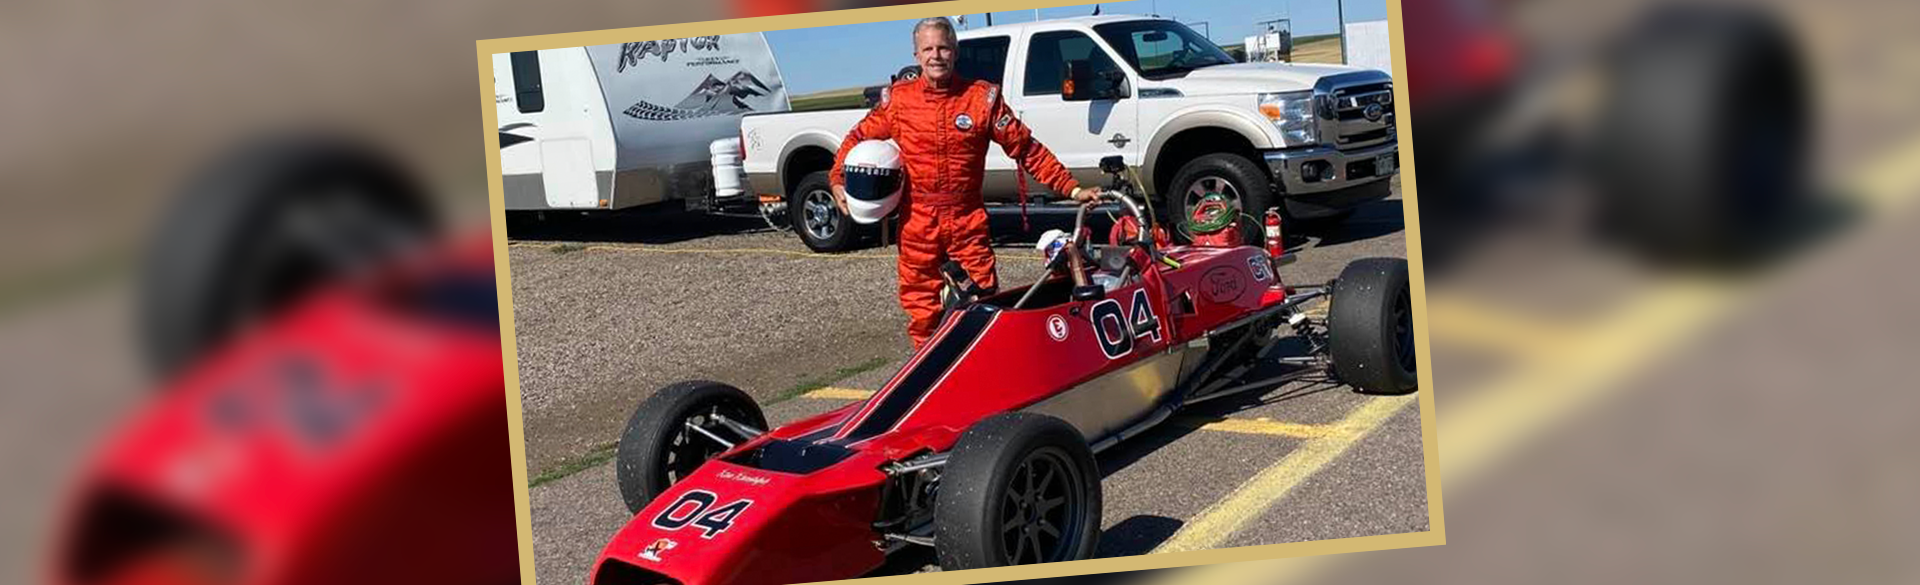 CAR T-cell therapy patient Ron Randolph with his race car